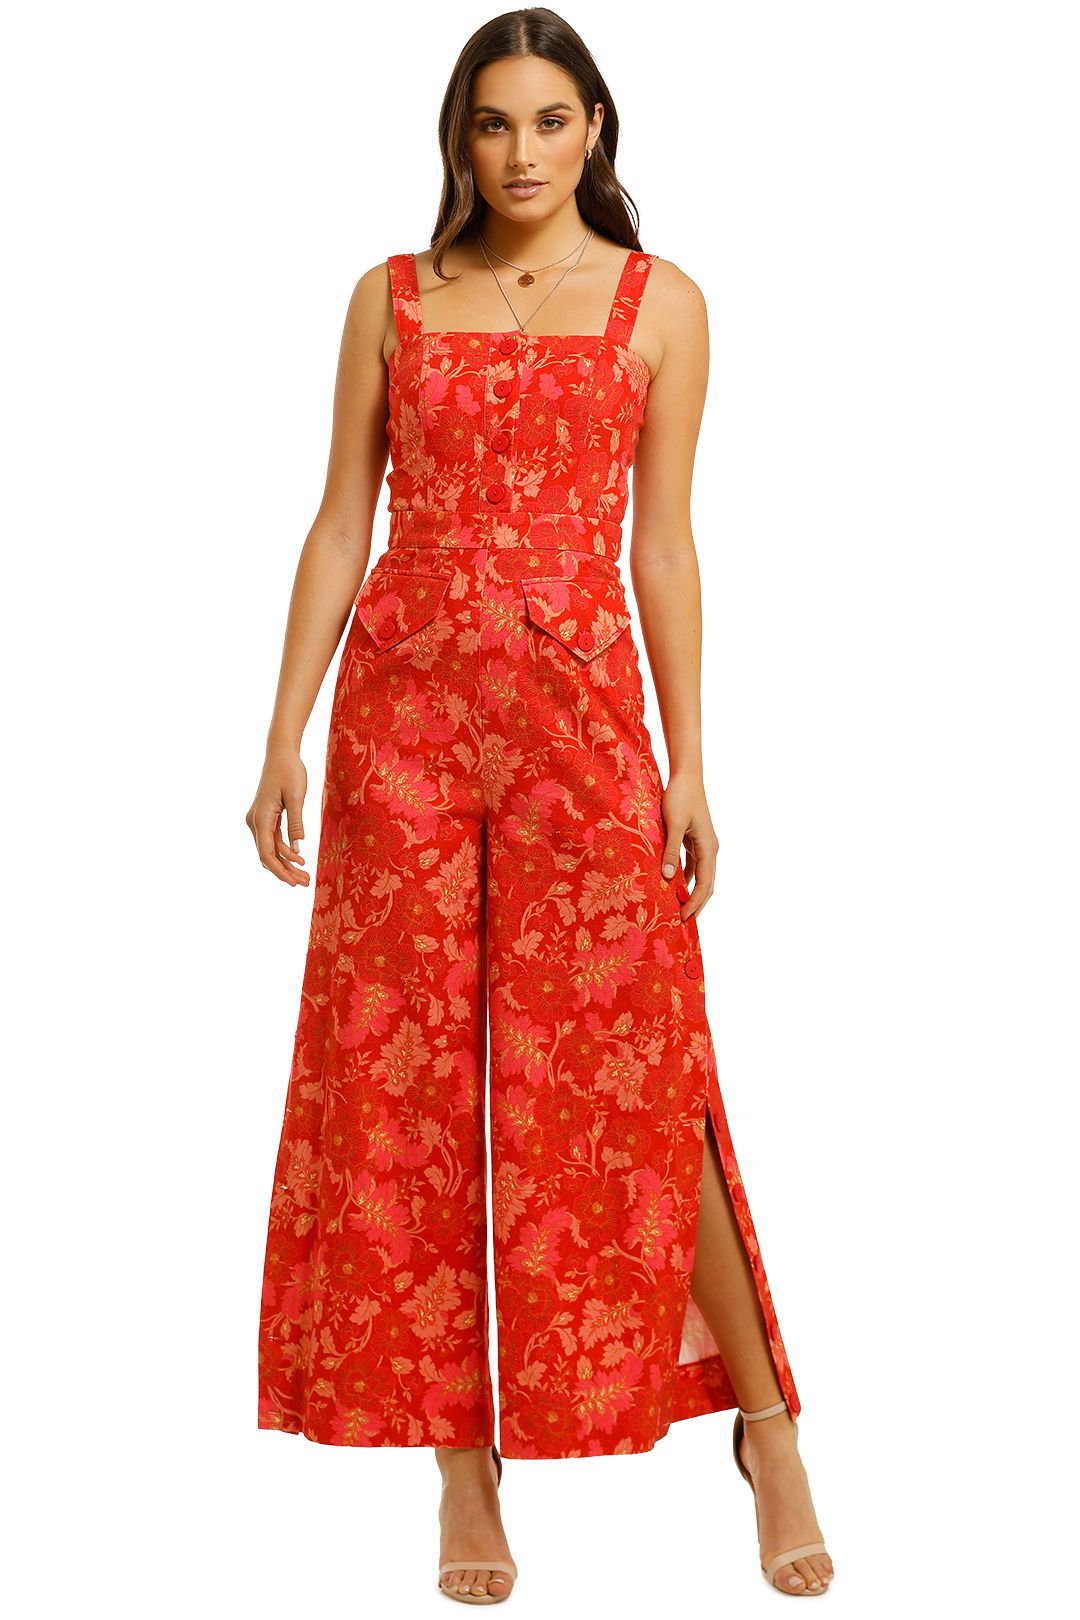 Hibiscus Jumpsuit in Print by Ministry of Style for Hire | GlamCorner